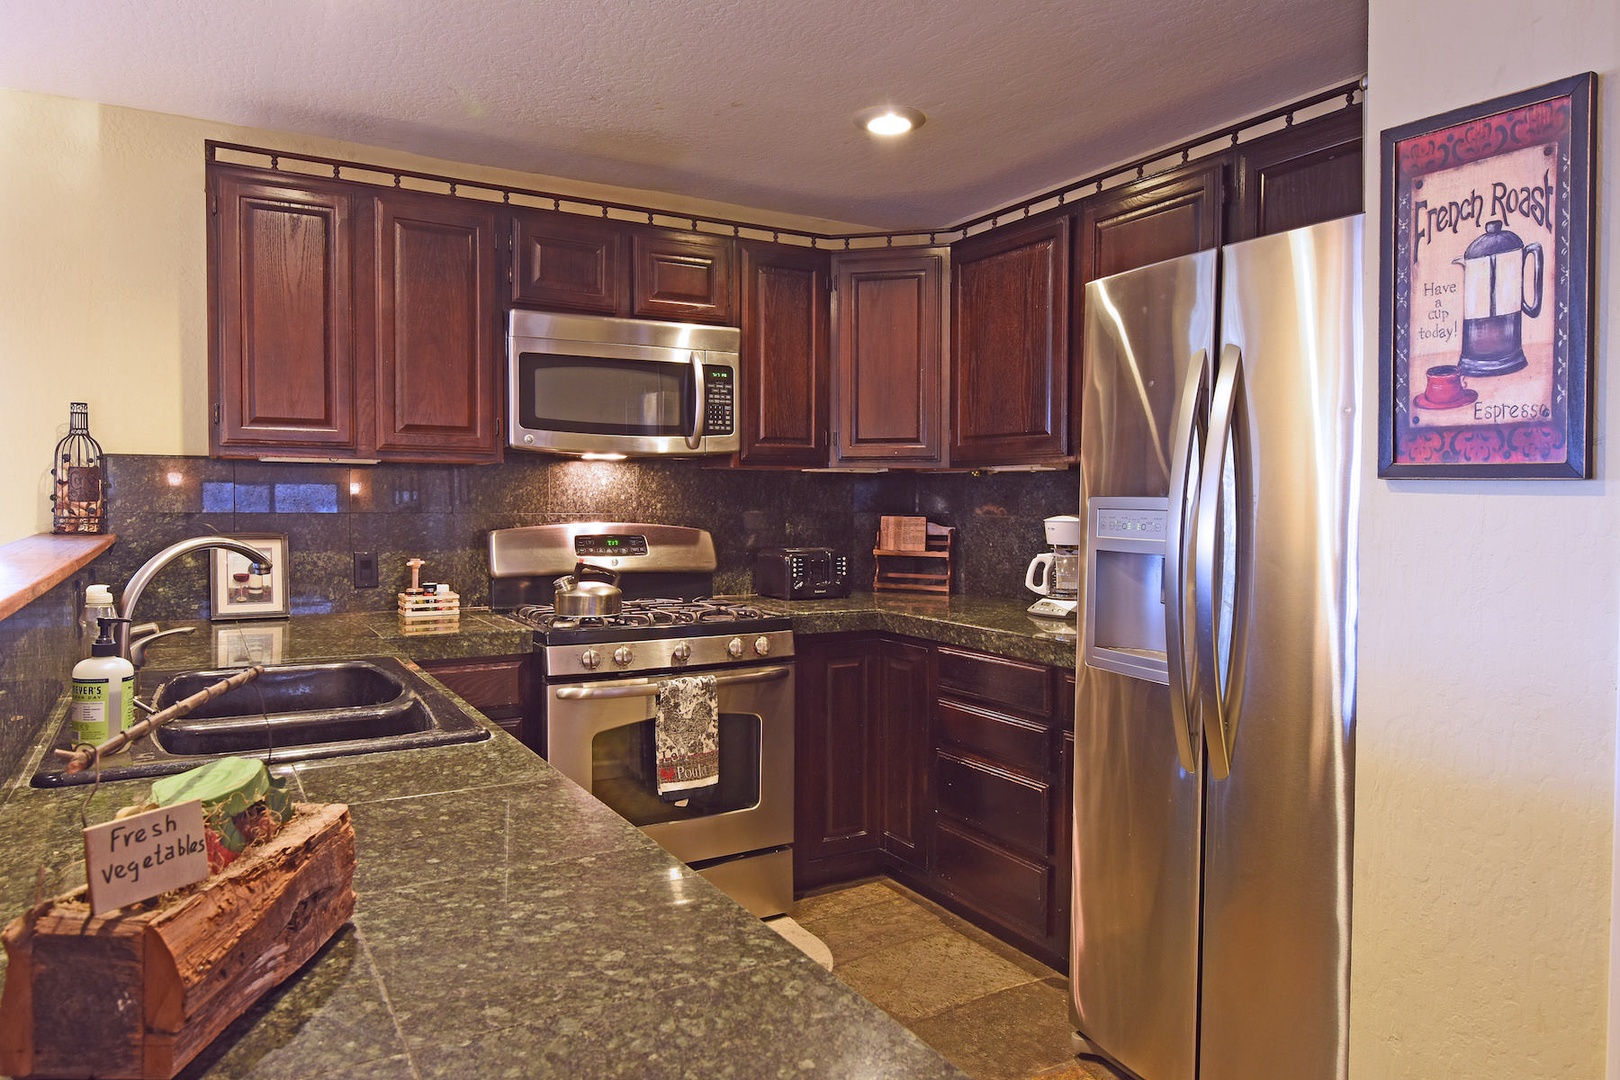 Full kitchen w/ toaster, blender, wine ware, coffee maker, and more!